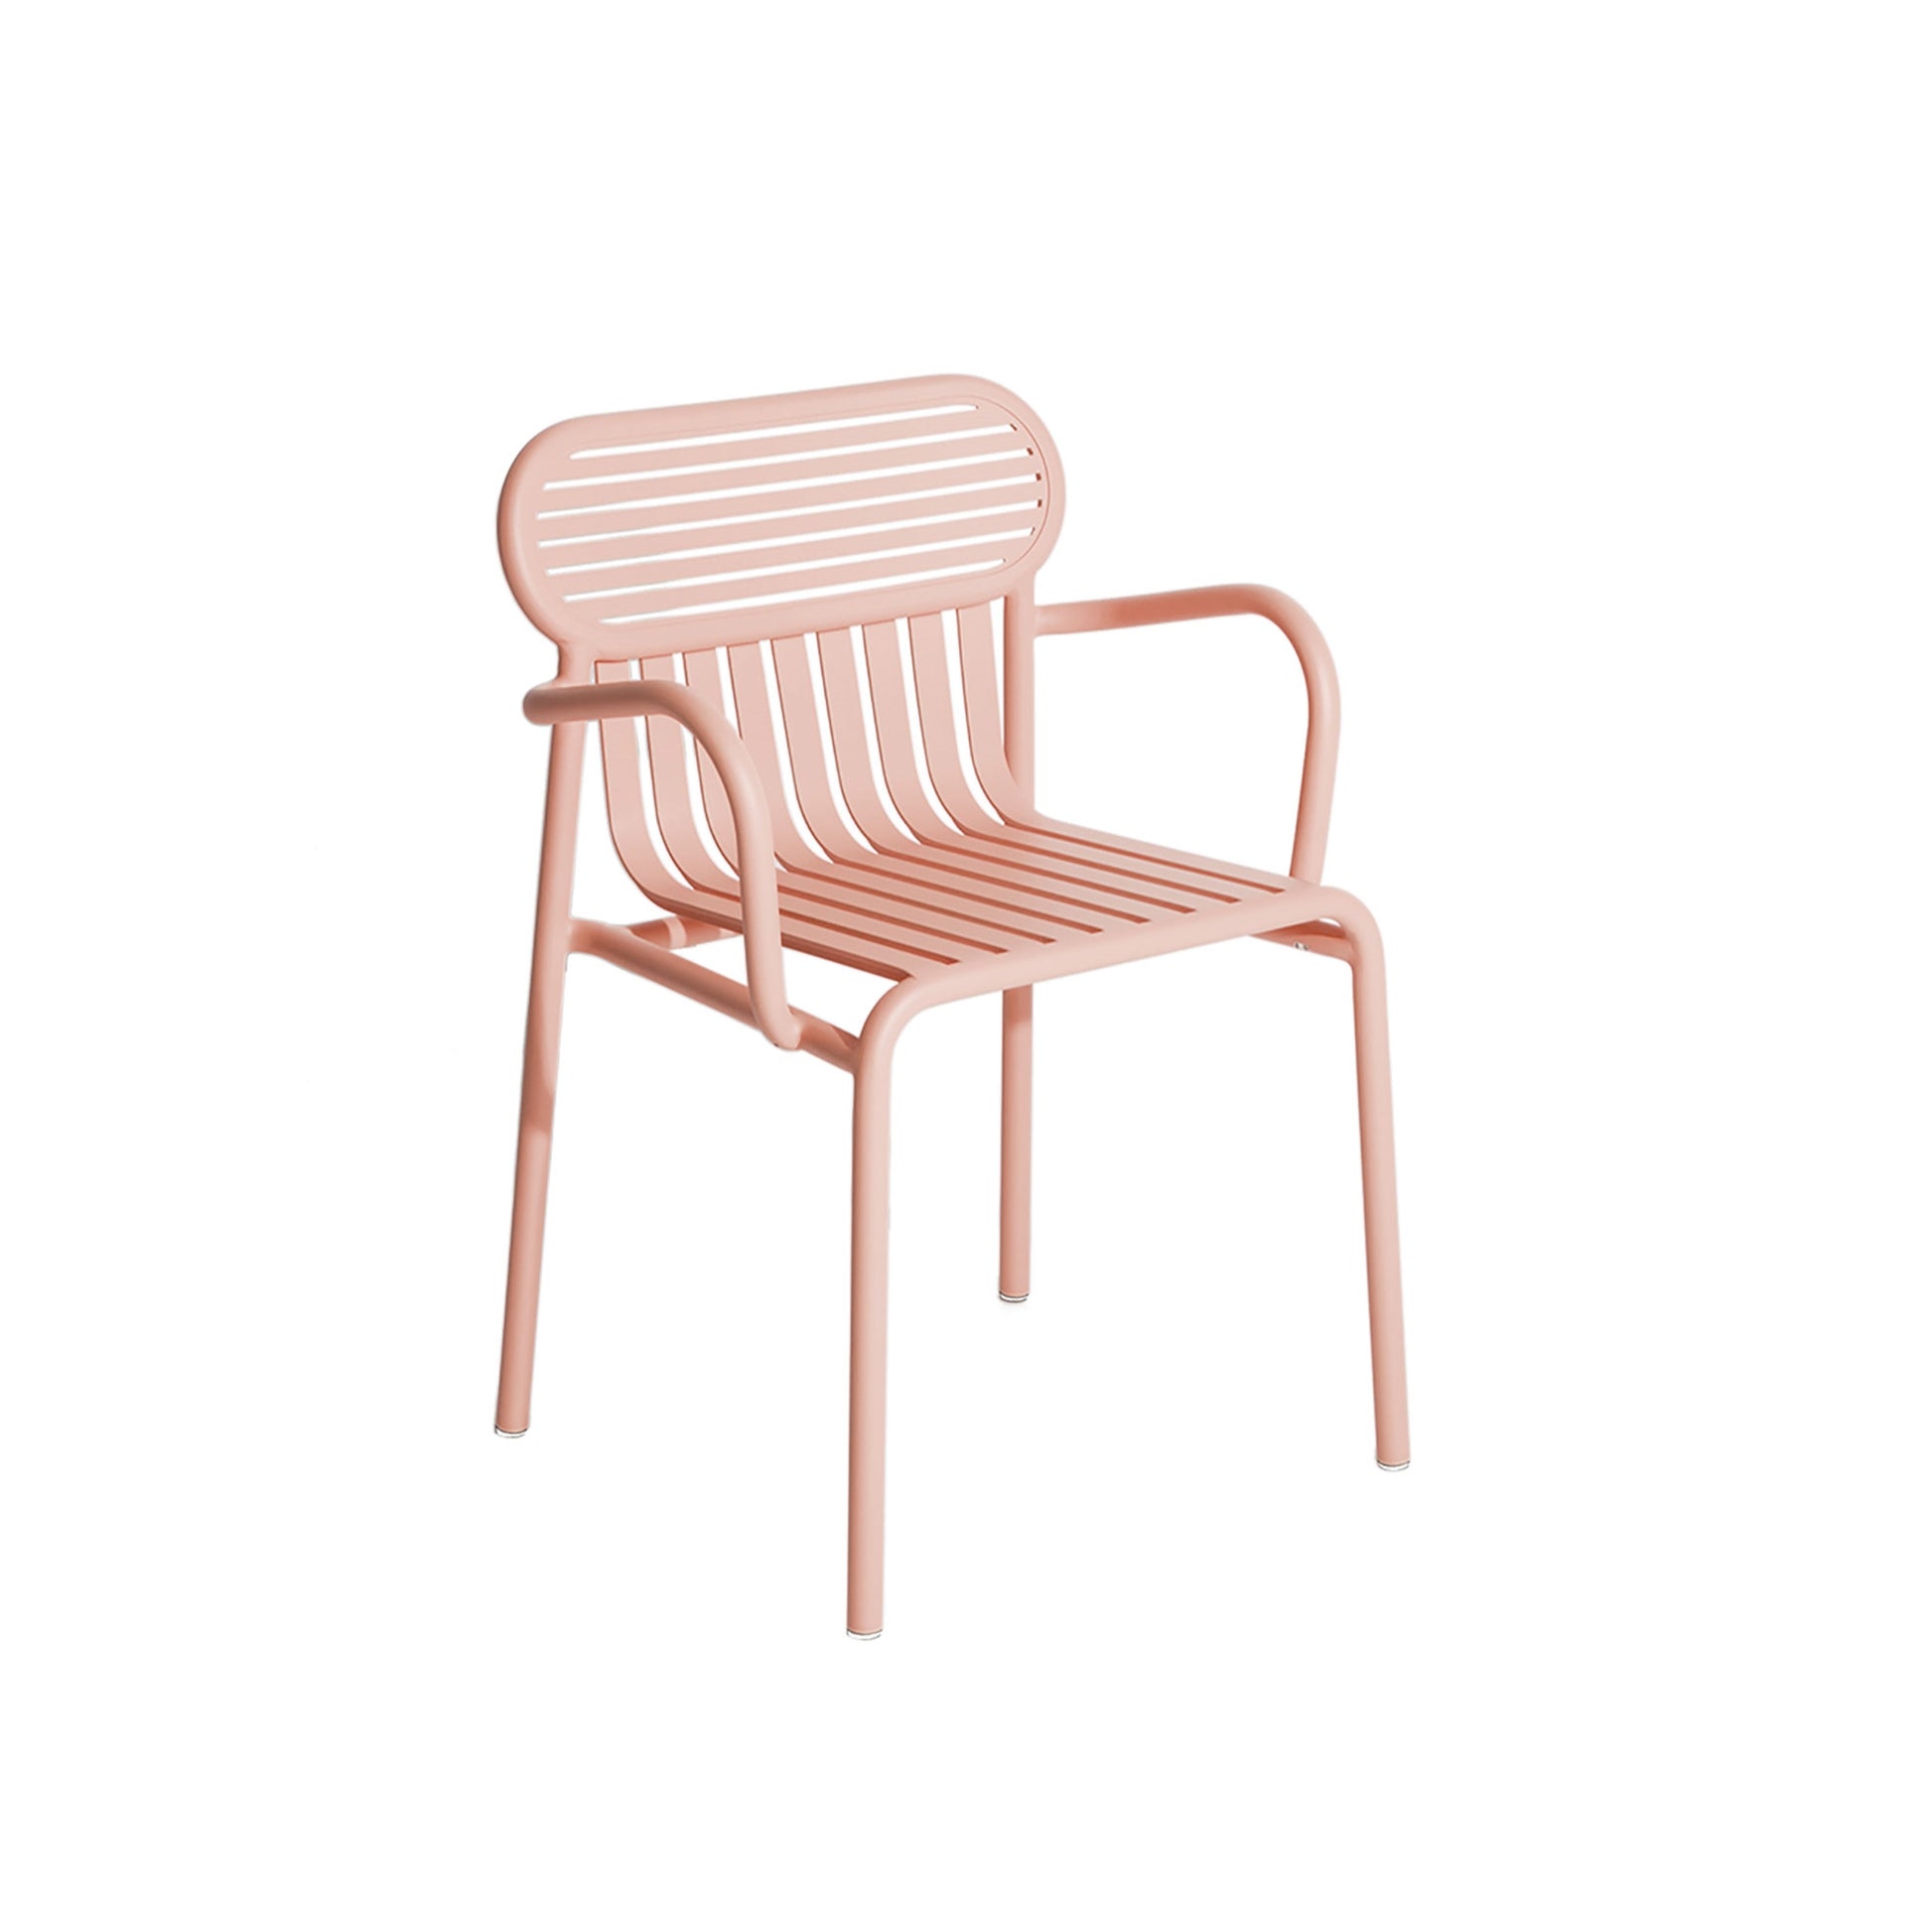 WEEK-END Dining Chair with Armrests by Petite Friture #Blush